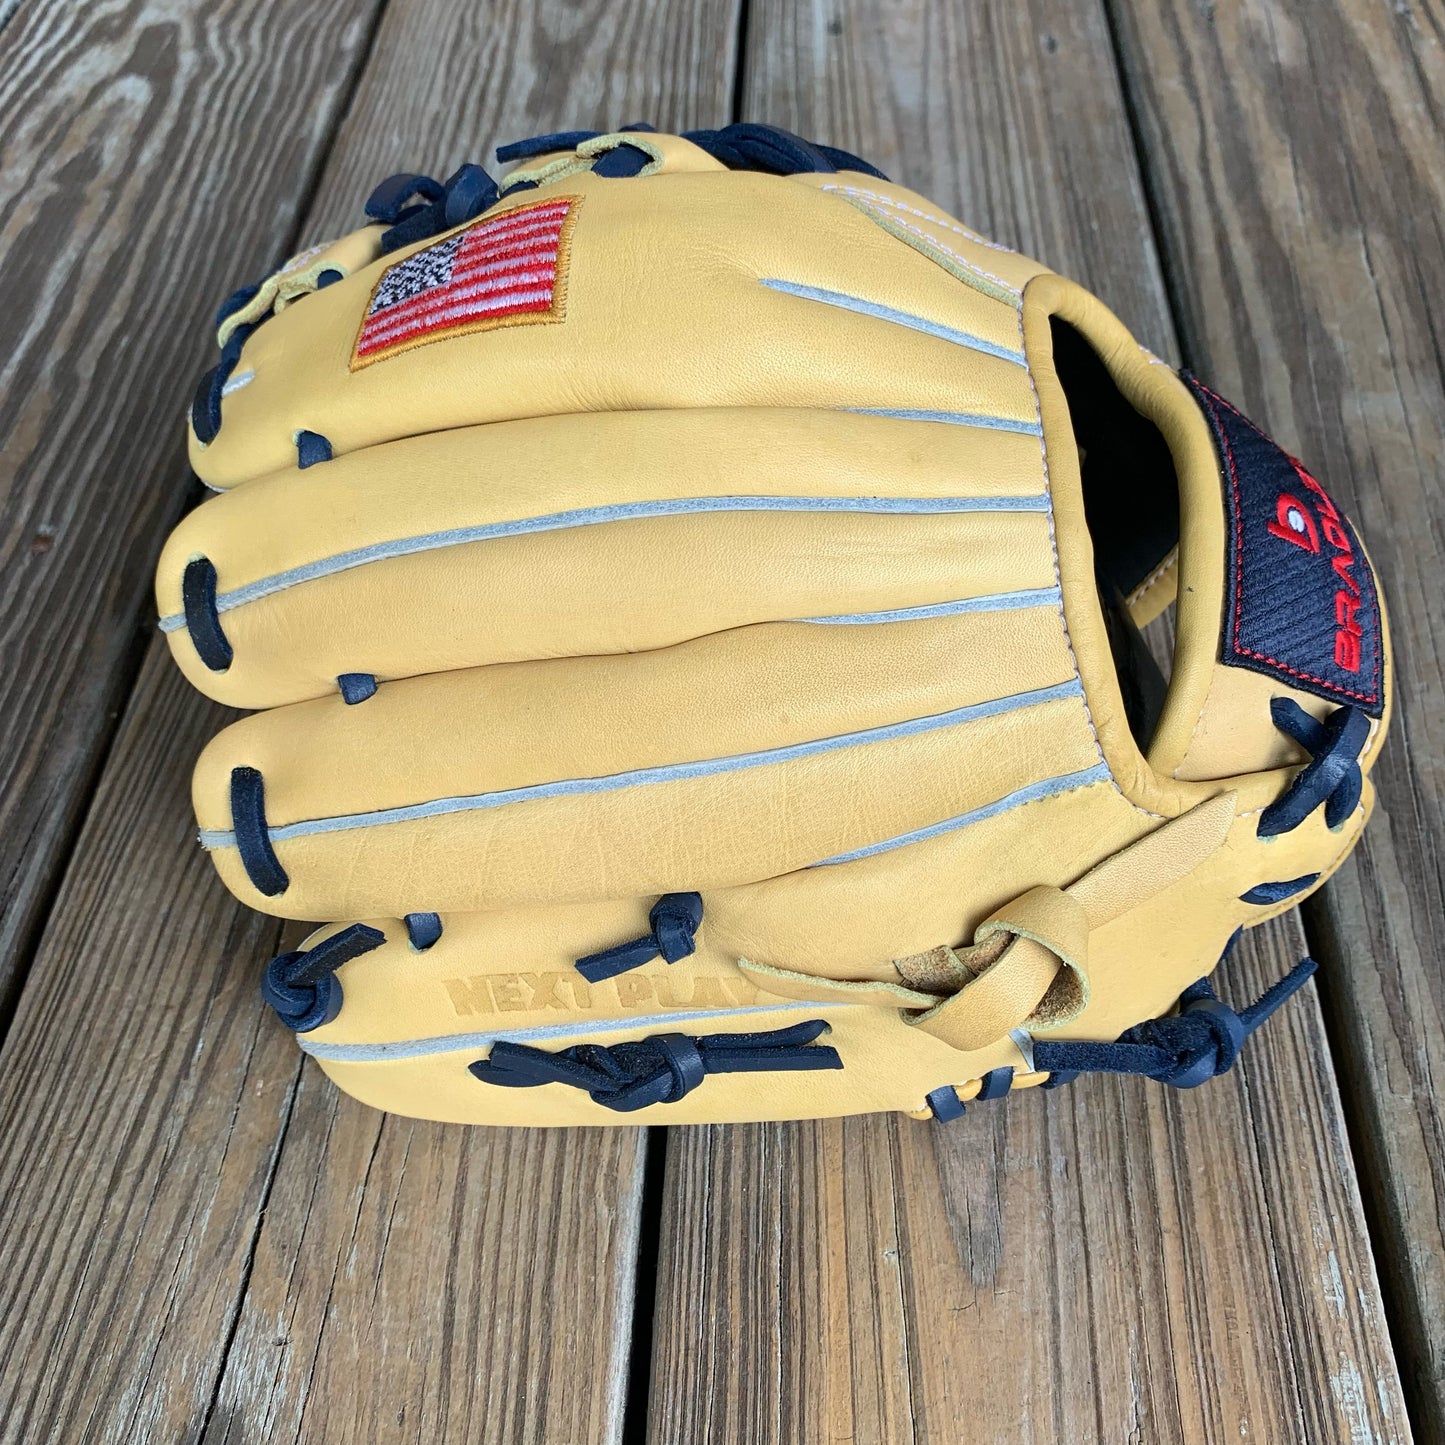 I-Web, Next Play Series '23 LEFTY ONLY